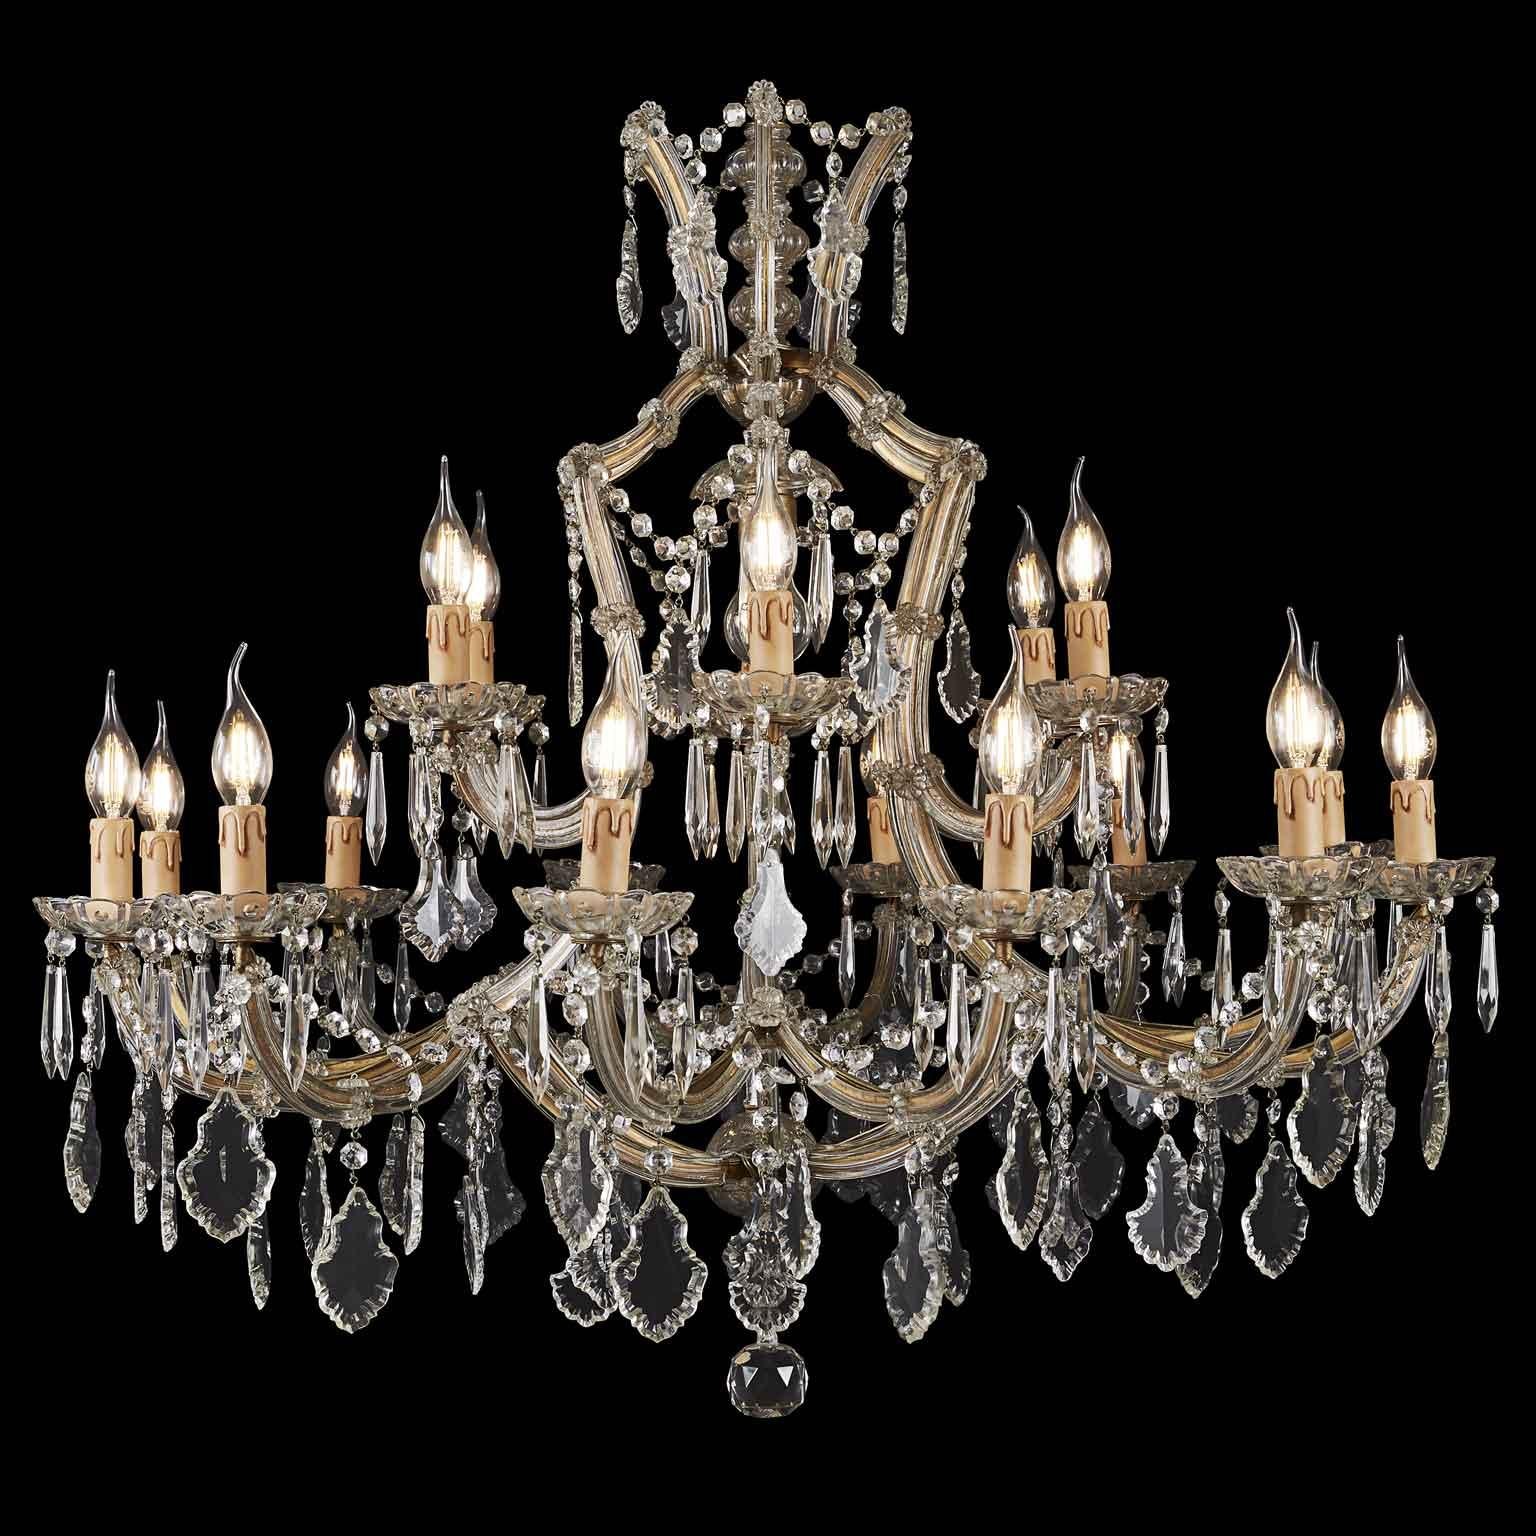 Gorgeous Italian Marie Therese nineteen-light crystal chandelier with a shaped central stem surmounted by beautifully contoured scrolling arms. This lovely two-tier chandelier is in good condition and come from a private palazzo of Milano